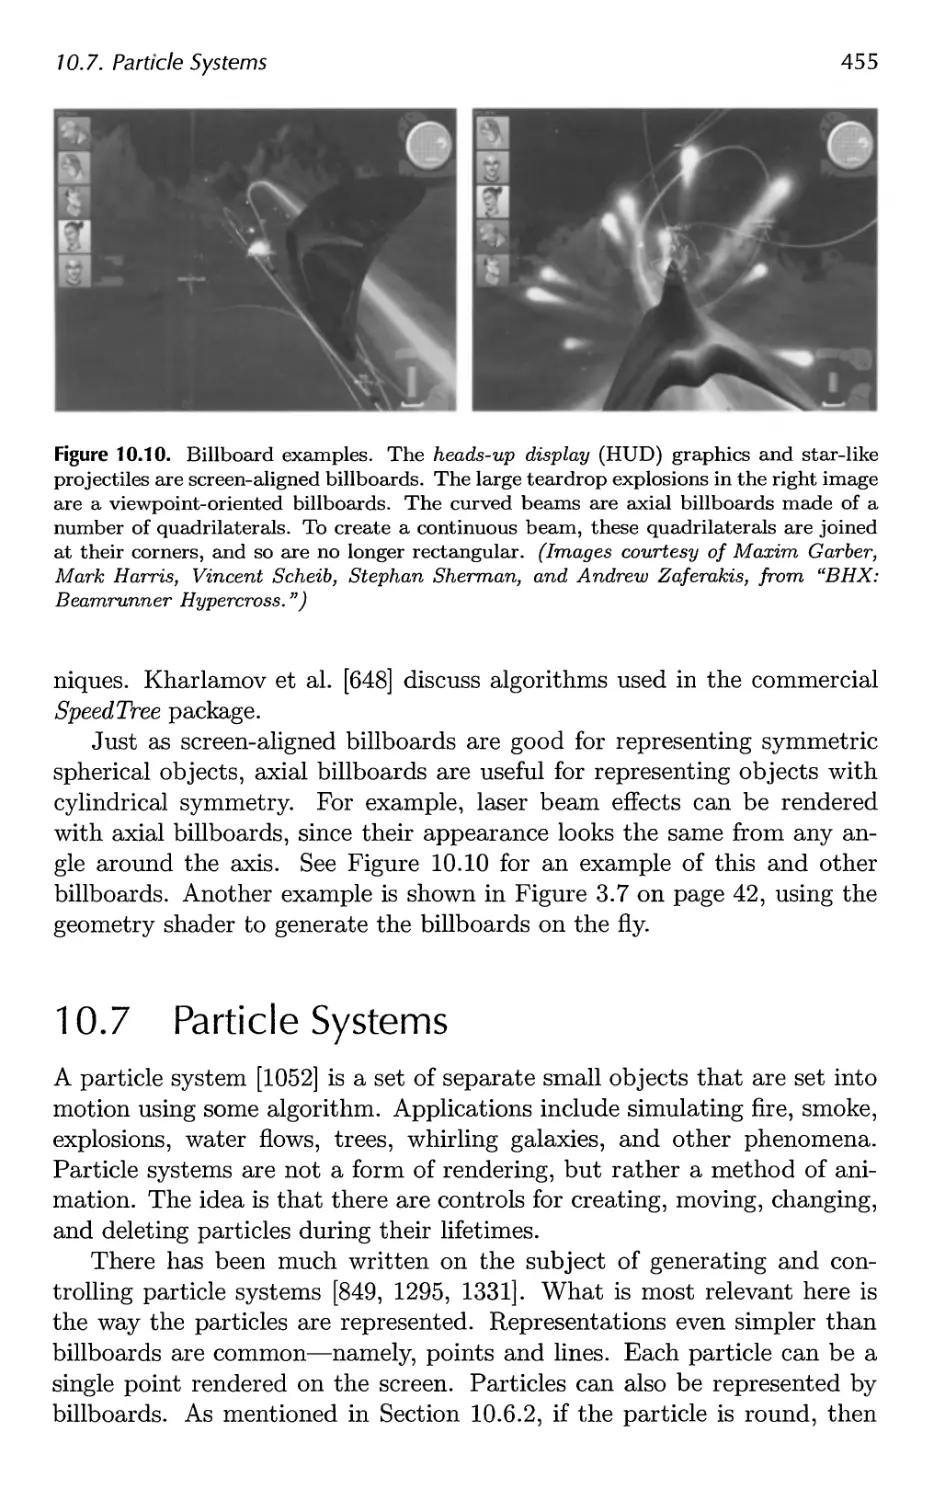 10.7 Particle Systems